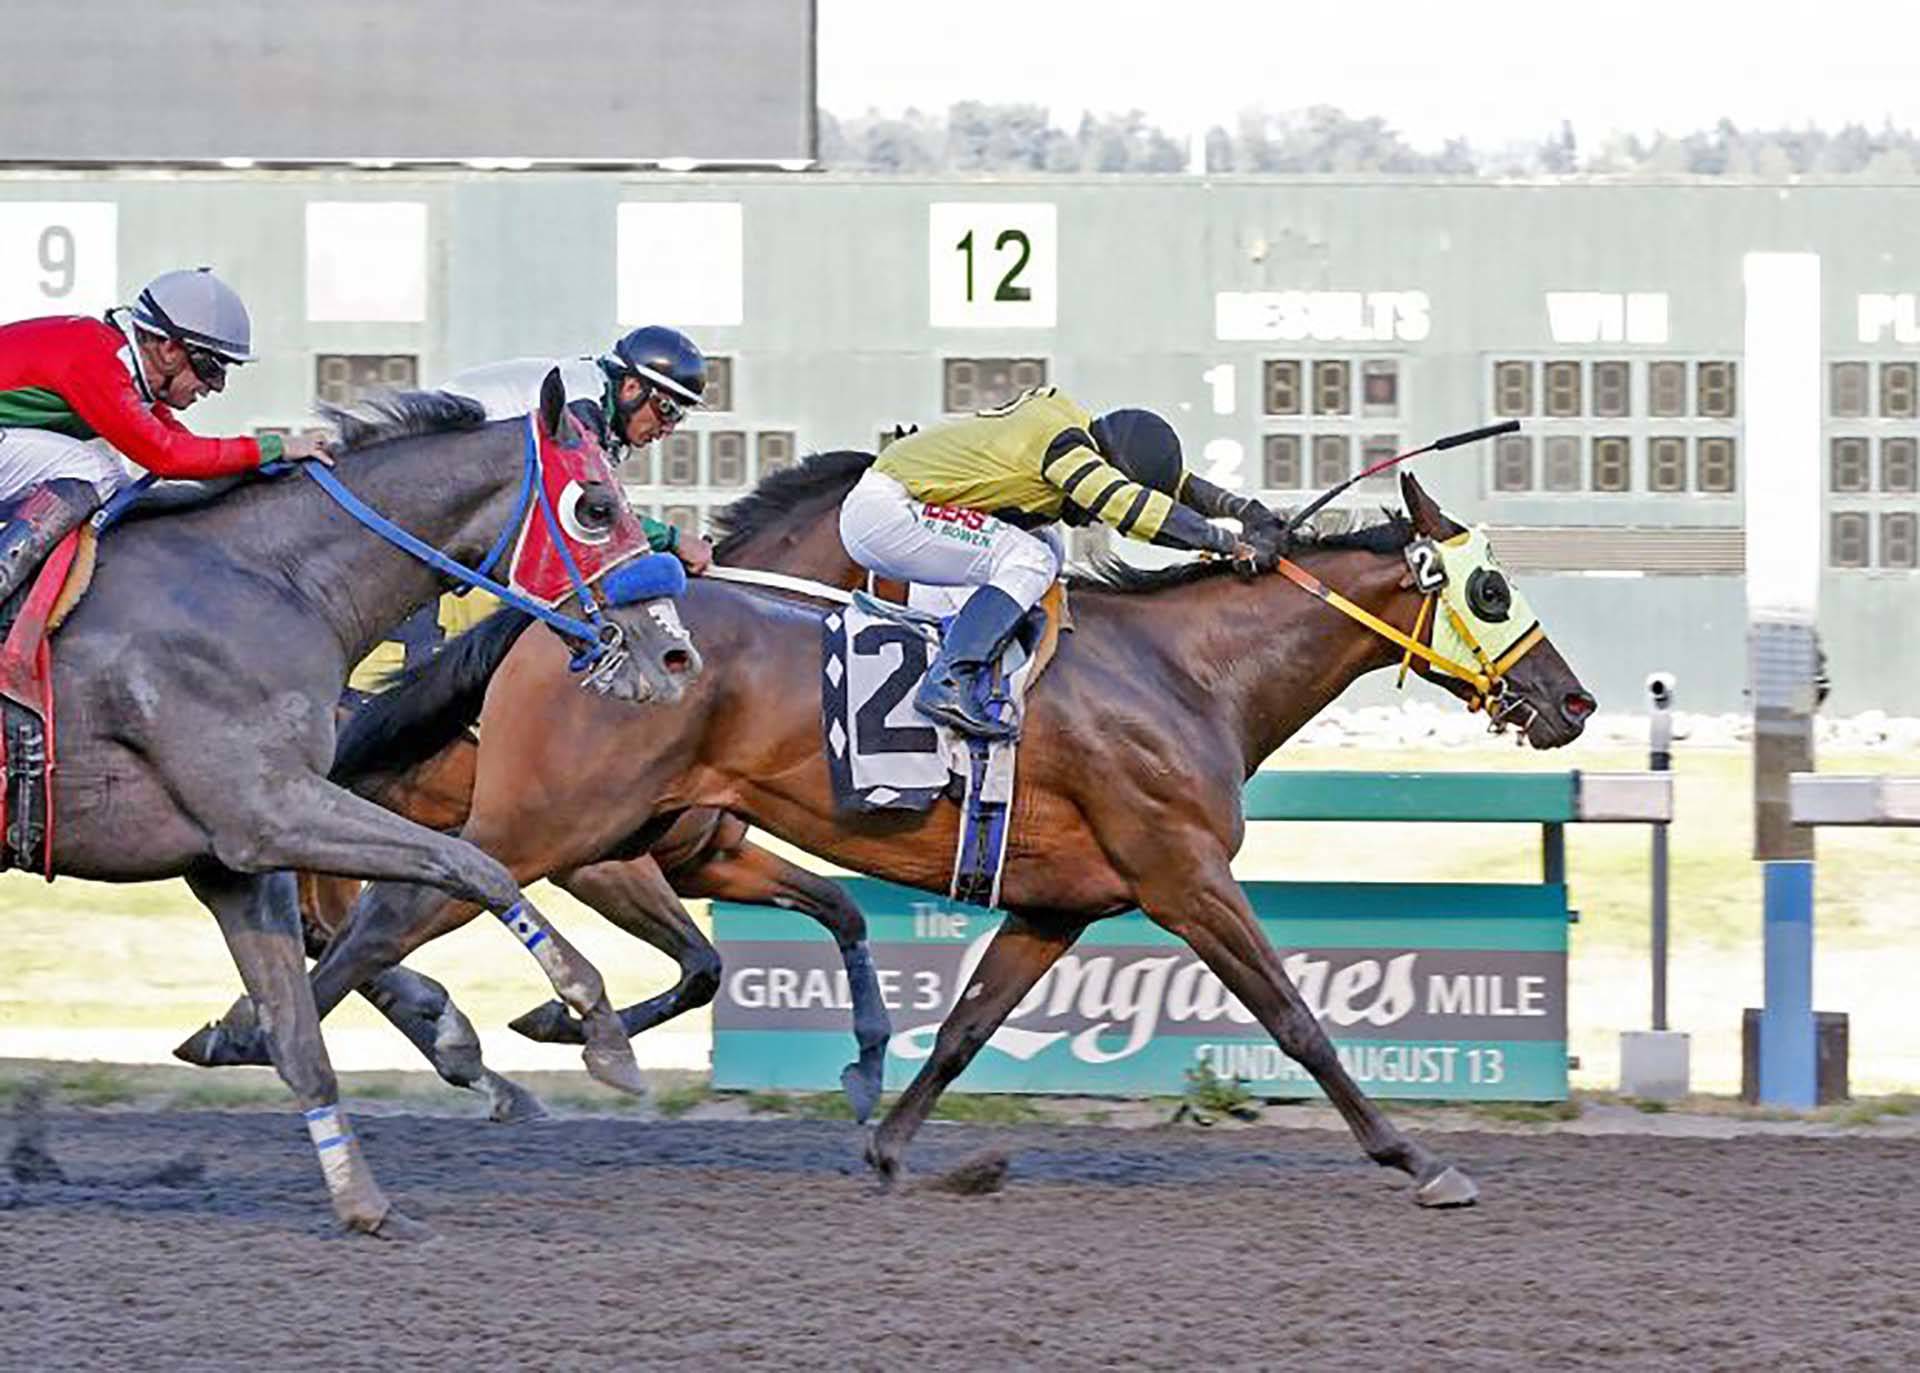 Little Dancer, with Rocco Bowen in the reins, right, upset the filed in the $75,000 Washington Oaks for 3-year-old fillies Sunday at Emerald Downs. COURTESY TRACK PHOTO